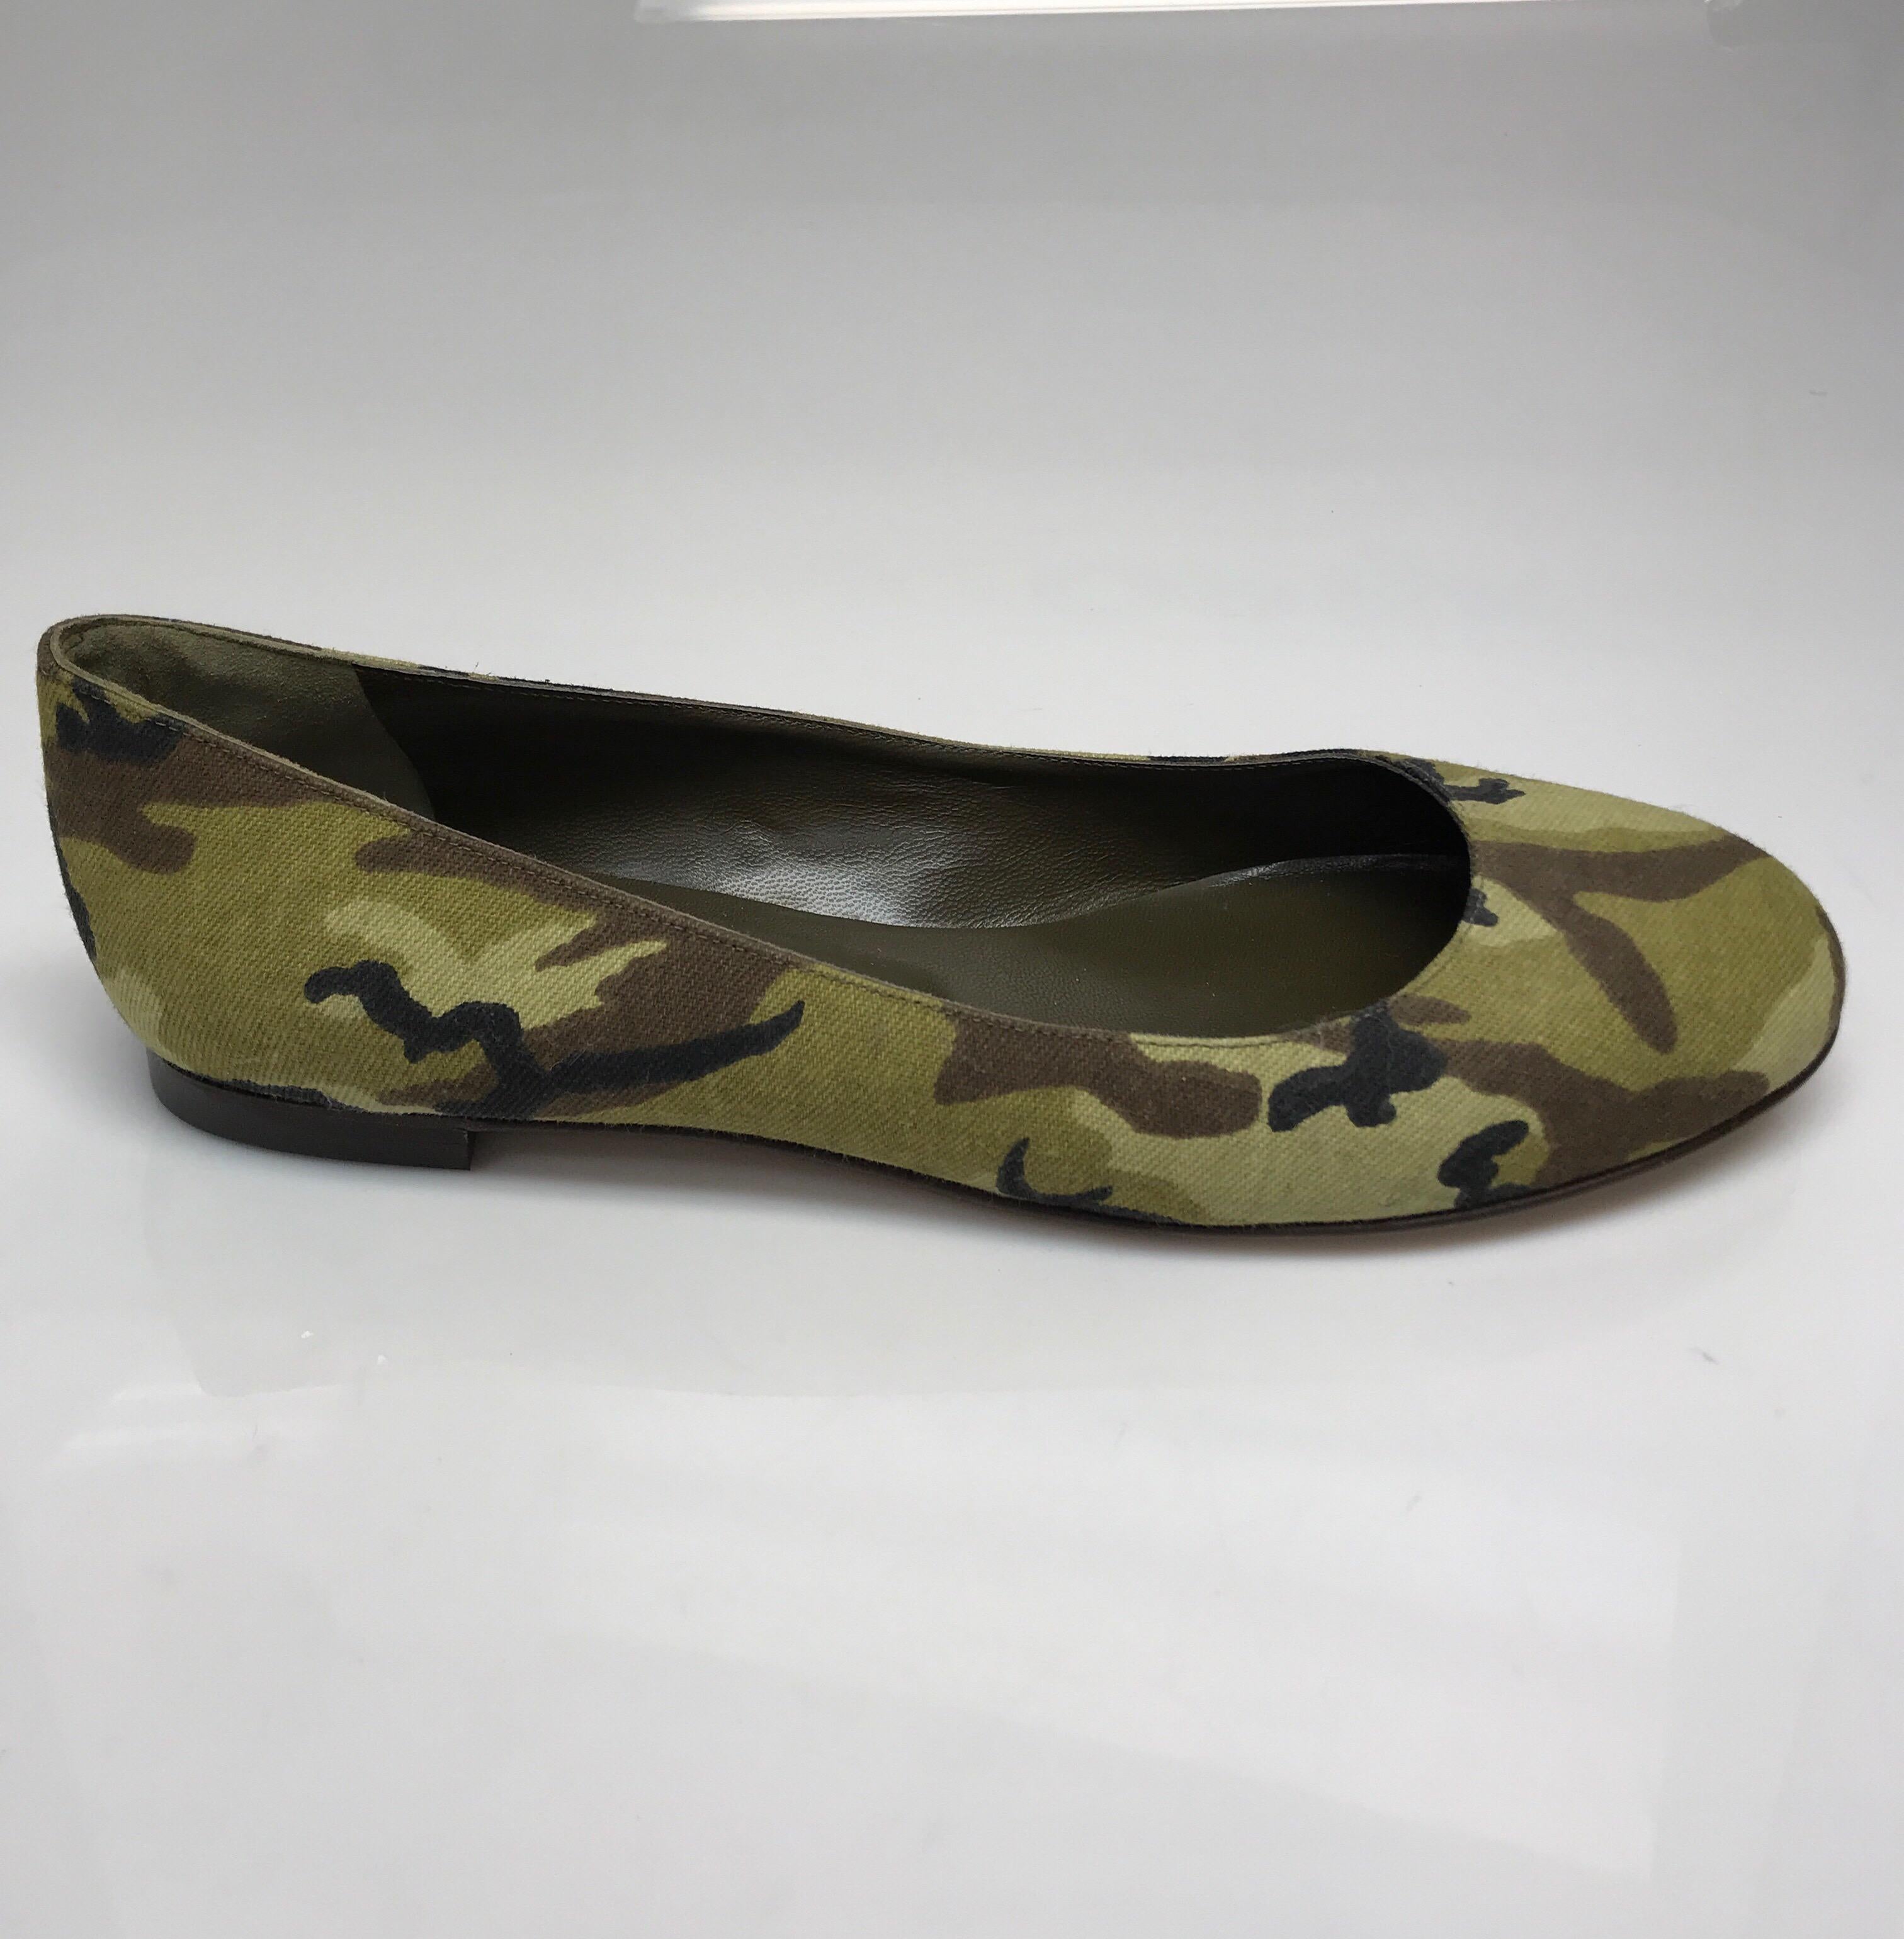 Manolo Blahnik Camouflage Ballet Flats-40. These adorable Manolo Blahnik flats are in excellent condition. They have barely any sign of use. They are made of a soft material with a camouflage pattern throughout.

Measurements:
Size: 40
Heel height: